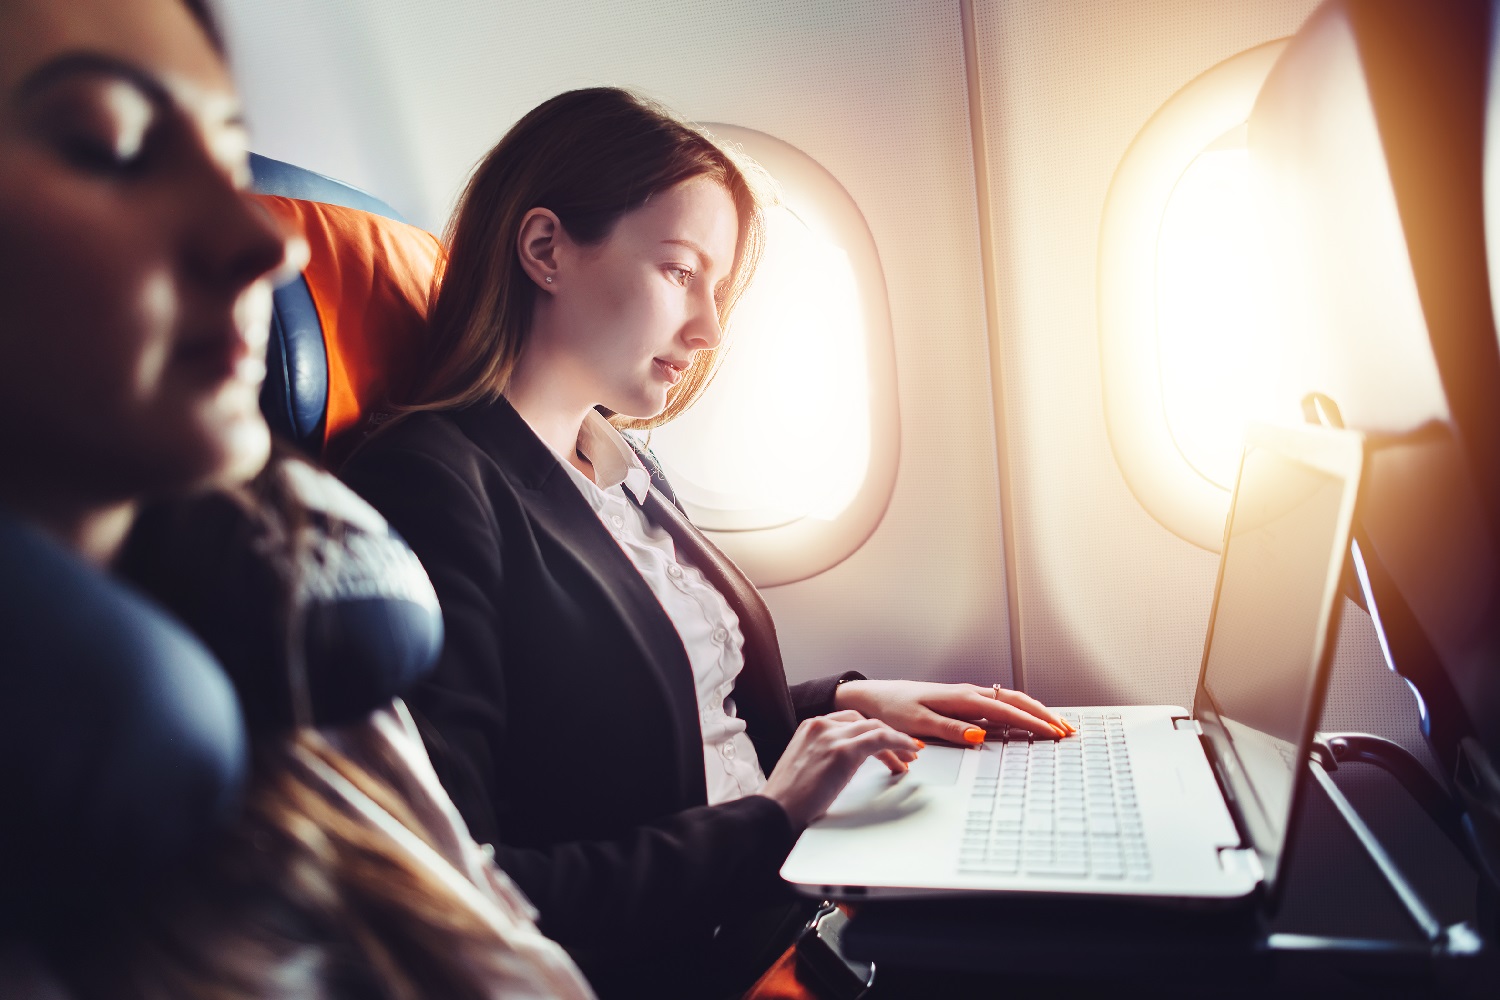 Business Traveling Jobs - The Ultimate Guide